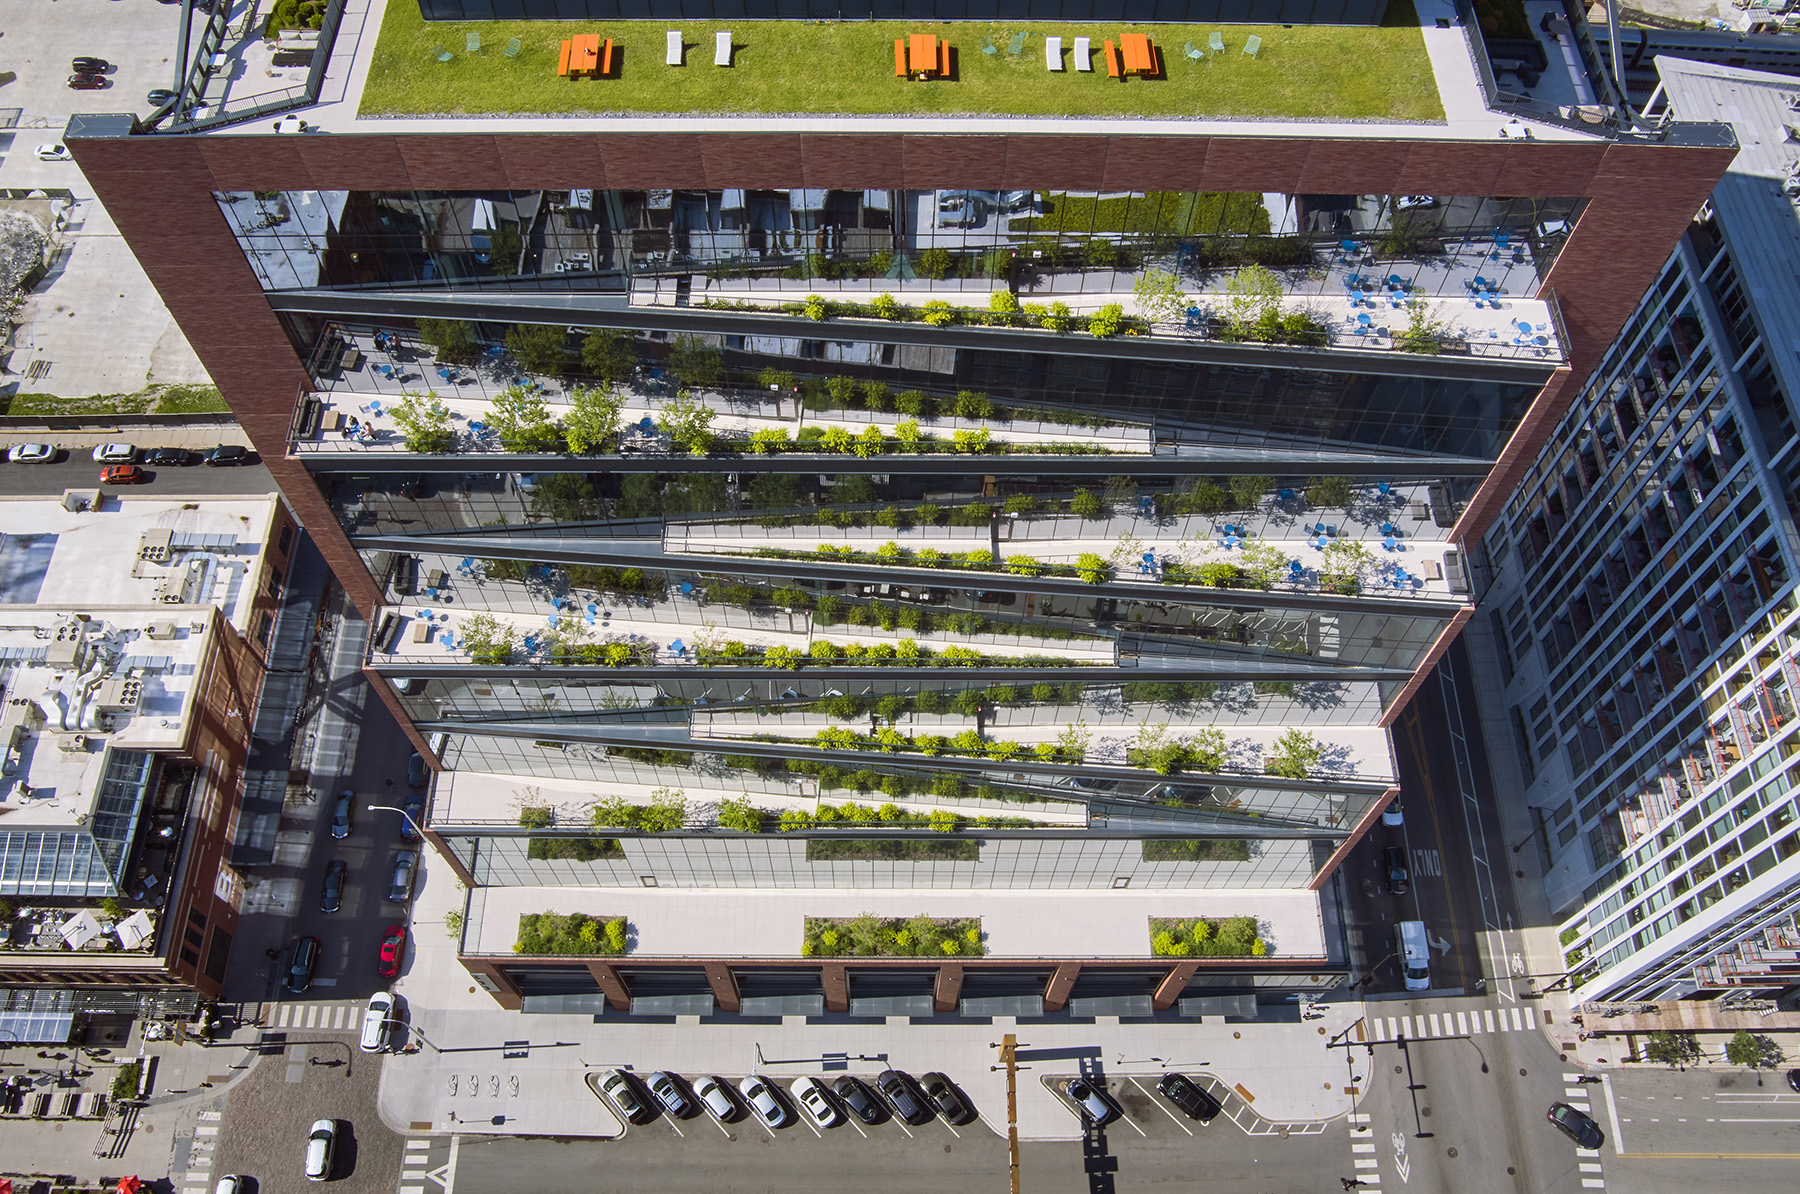 The image shows a green roof and green terraces on the top and side of a building. 